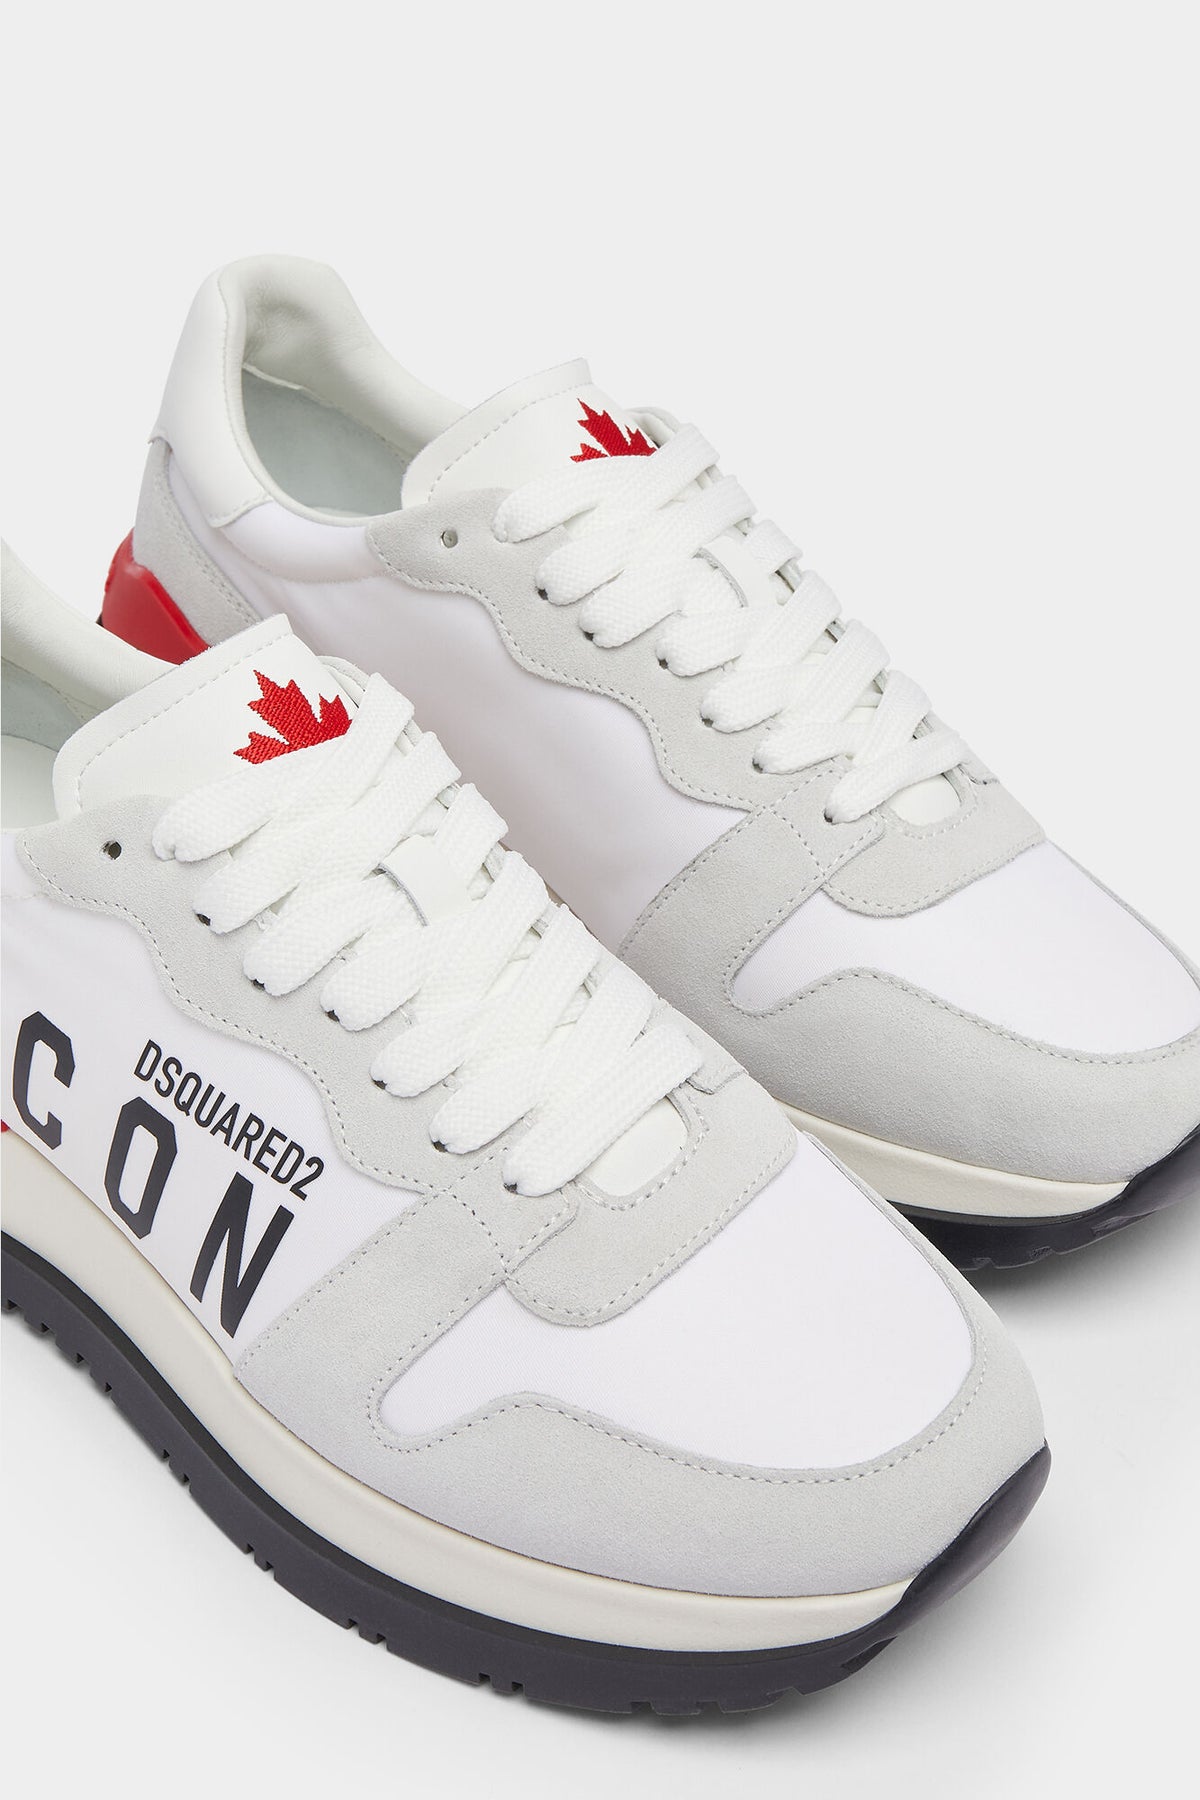 ICON RUNNING SNEAKERS